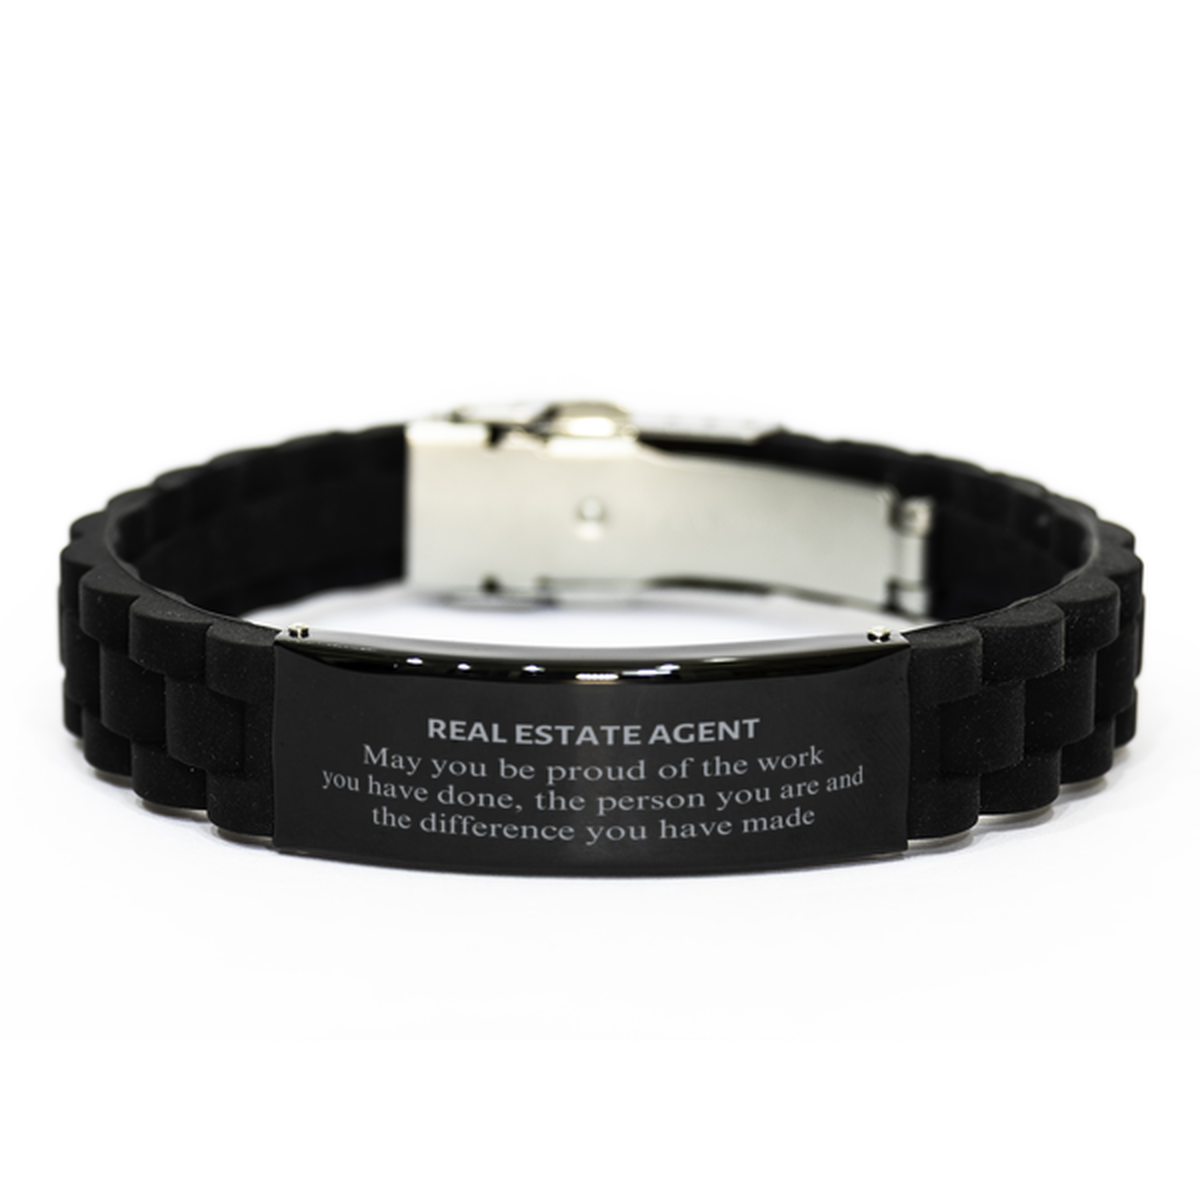 Real Estate Agent May you be proud of the work you have done, Retirement Real Estate Agent Black Glidelock Clasp Bracelet for Colleague Appreciation Gifts Amazing for Real Estate Agent